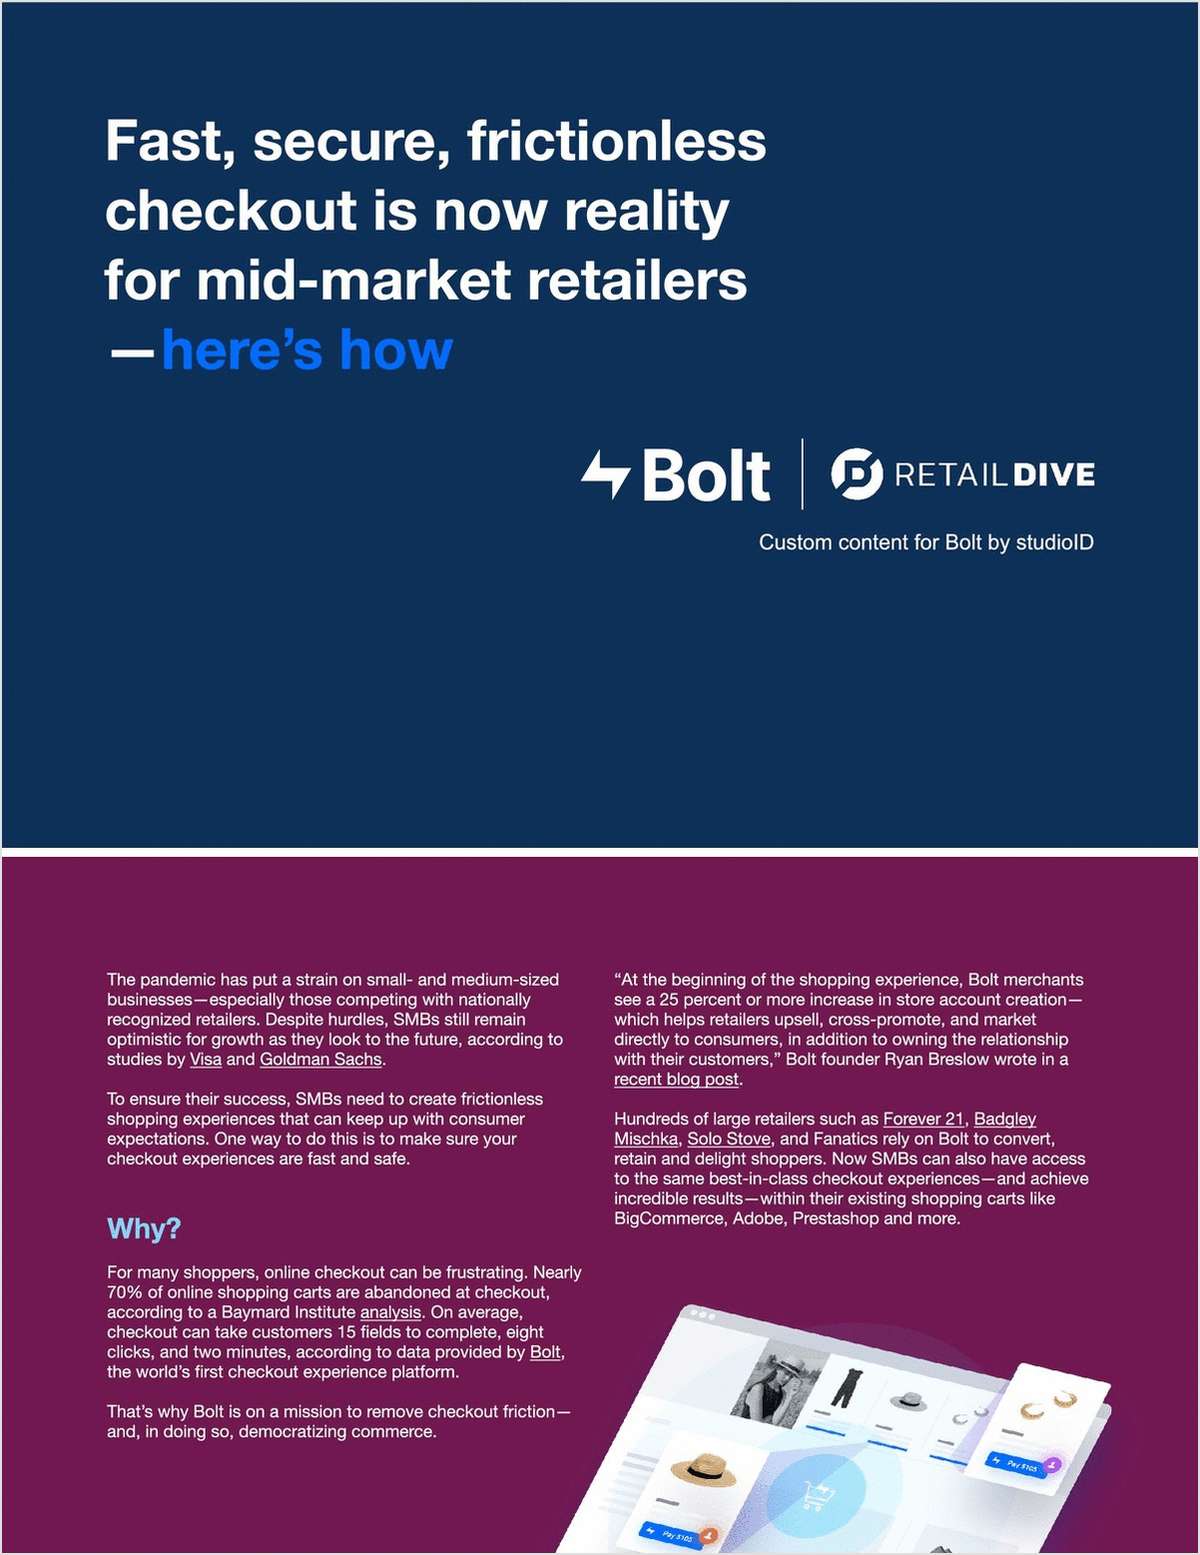 The Top 5 Ways Mid-Market Retailers Can Improve Their Checkout Experience